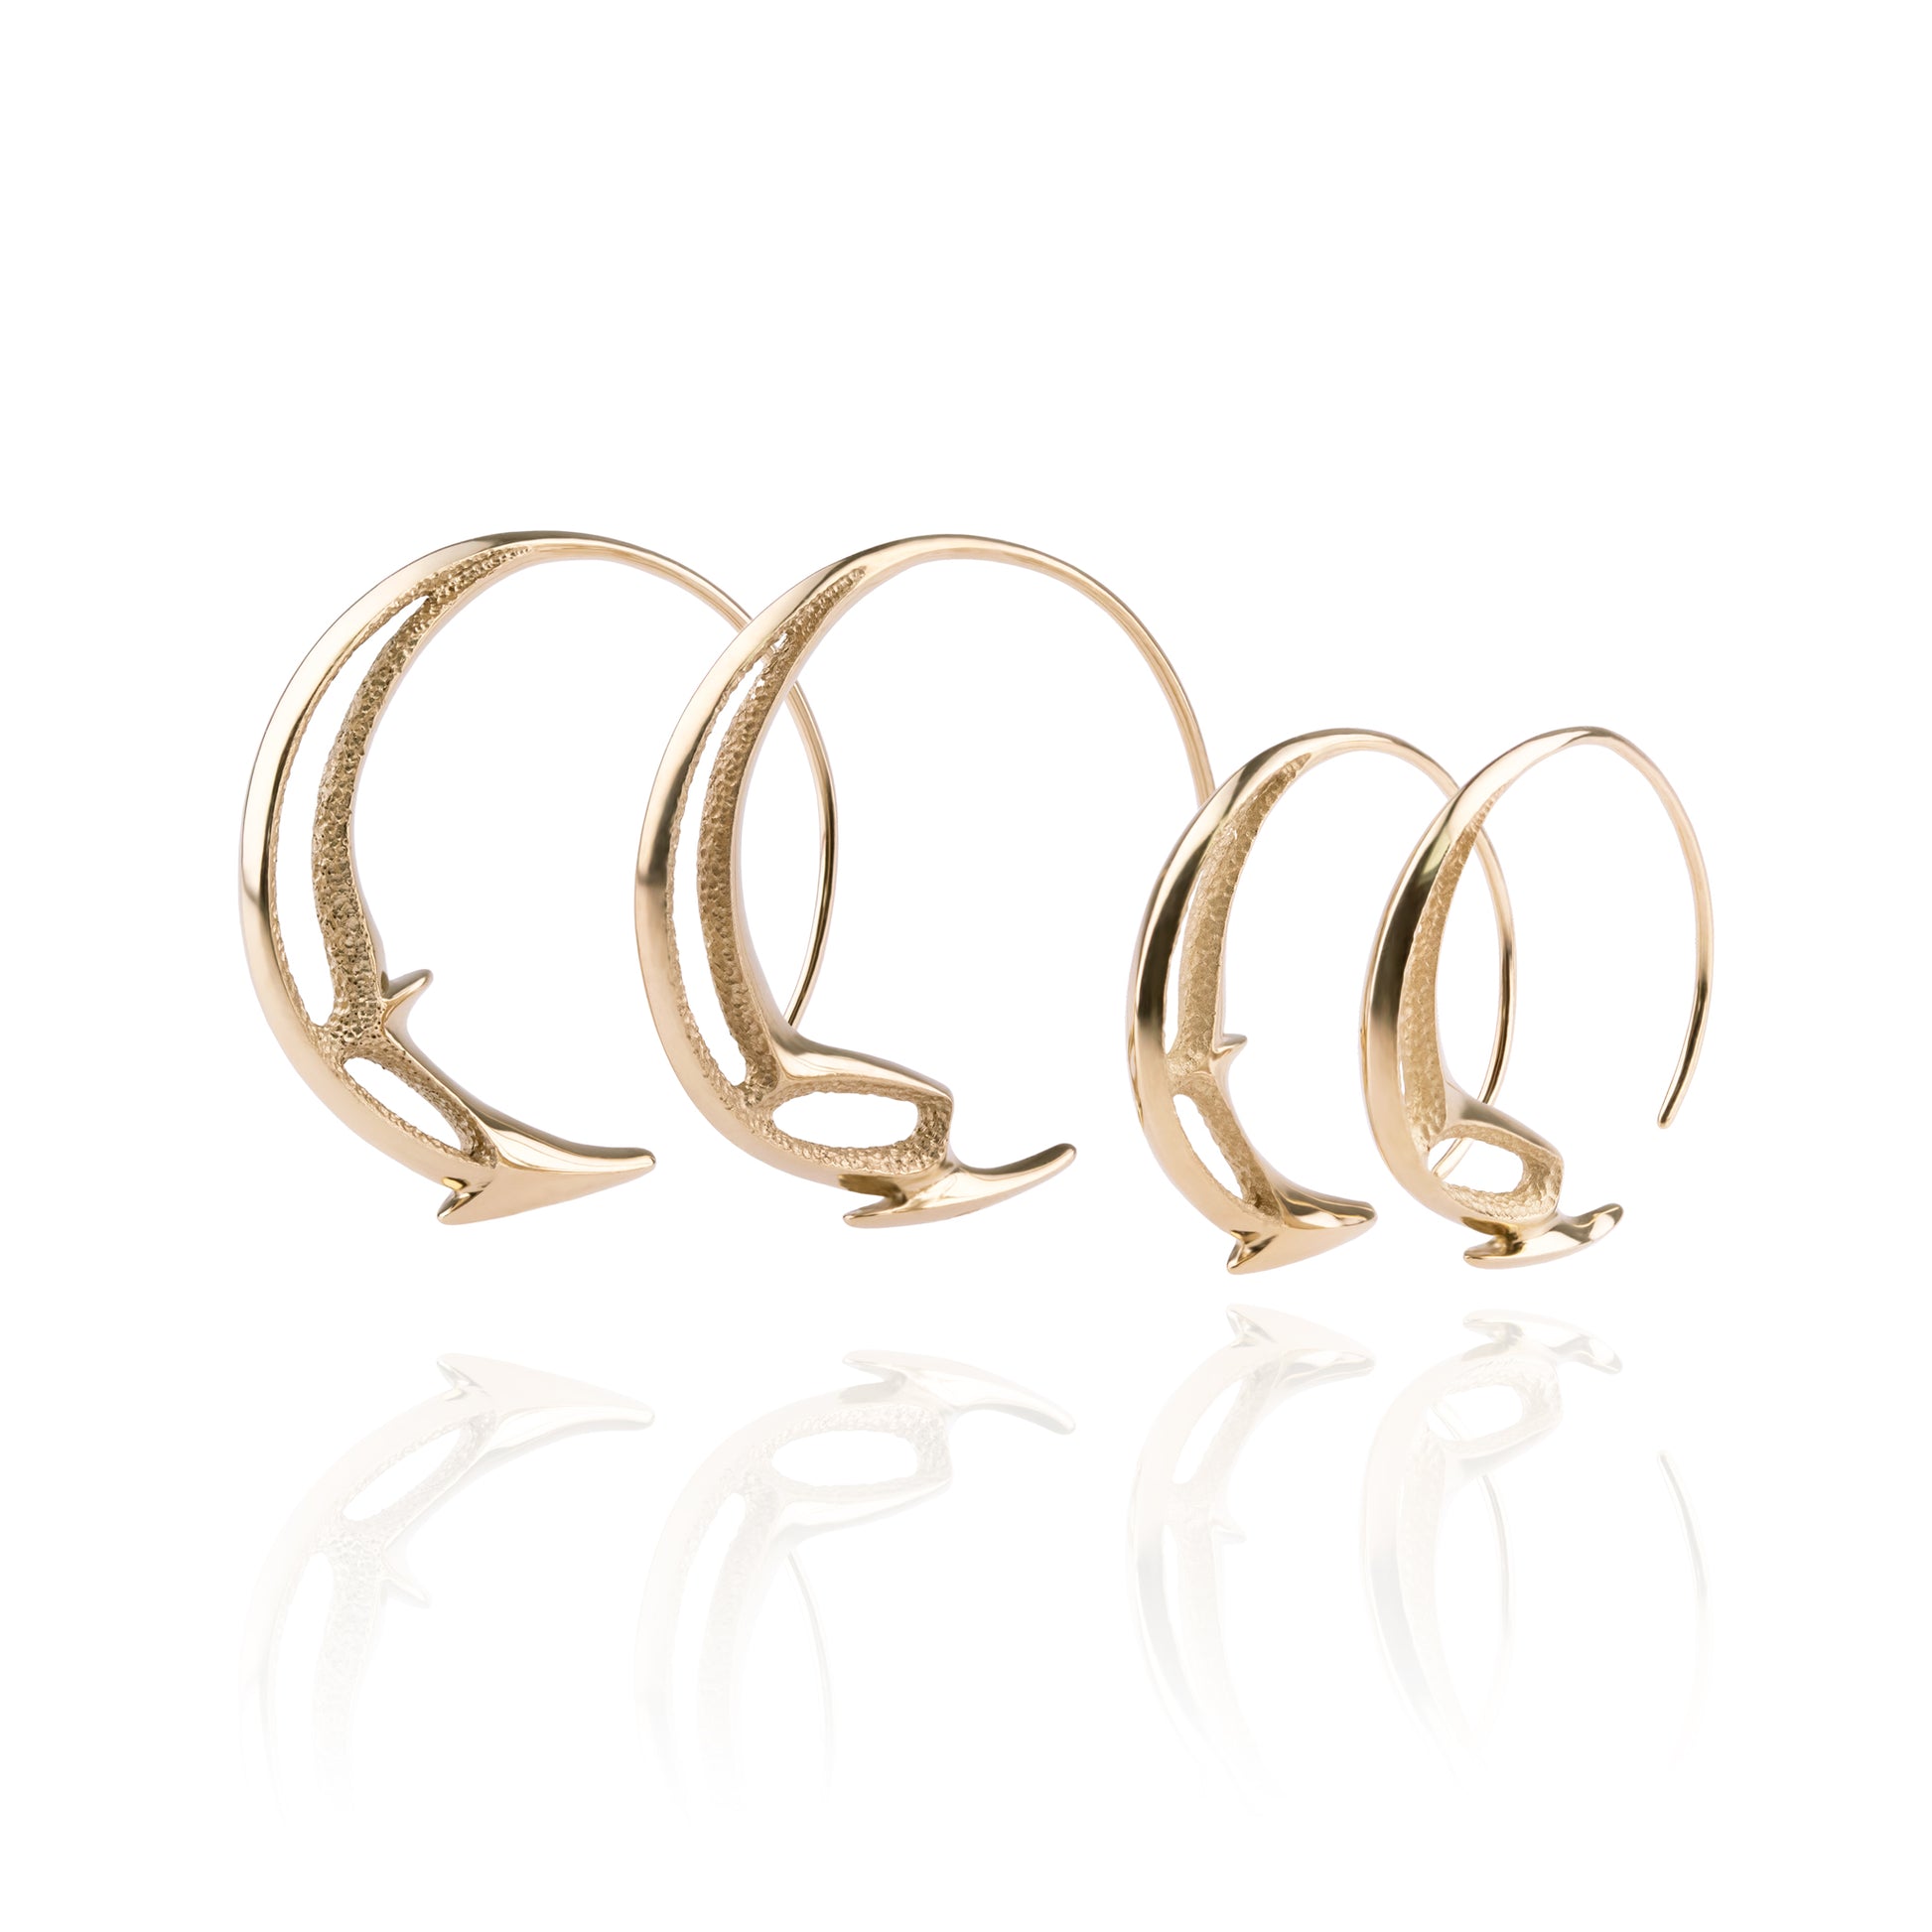 Orme-Brown Contemporary Fine Jewellery Spiral Hoop Earrings Recycled Fairmined Gold Ethical Sustainable Small Medium Everyday